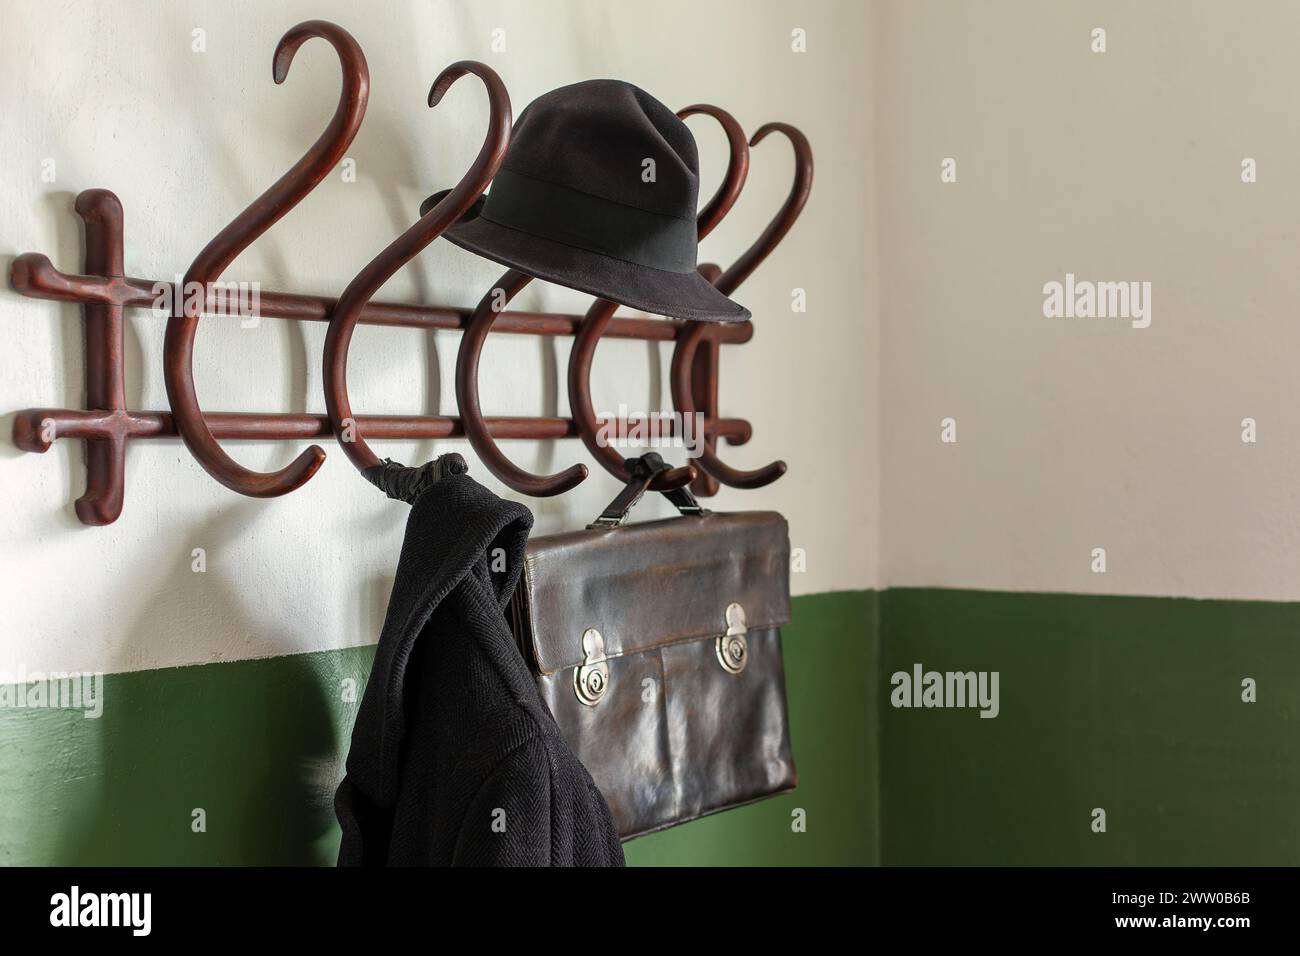 Clothes hanger. Old wooden clothes hanger. Return home from the street. Classic hanging poll. vintage coat and hat hanger in the old style. Stock Photo